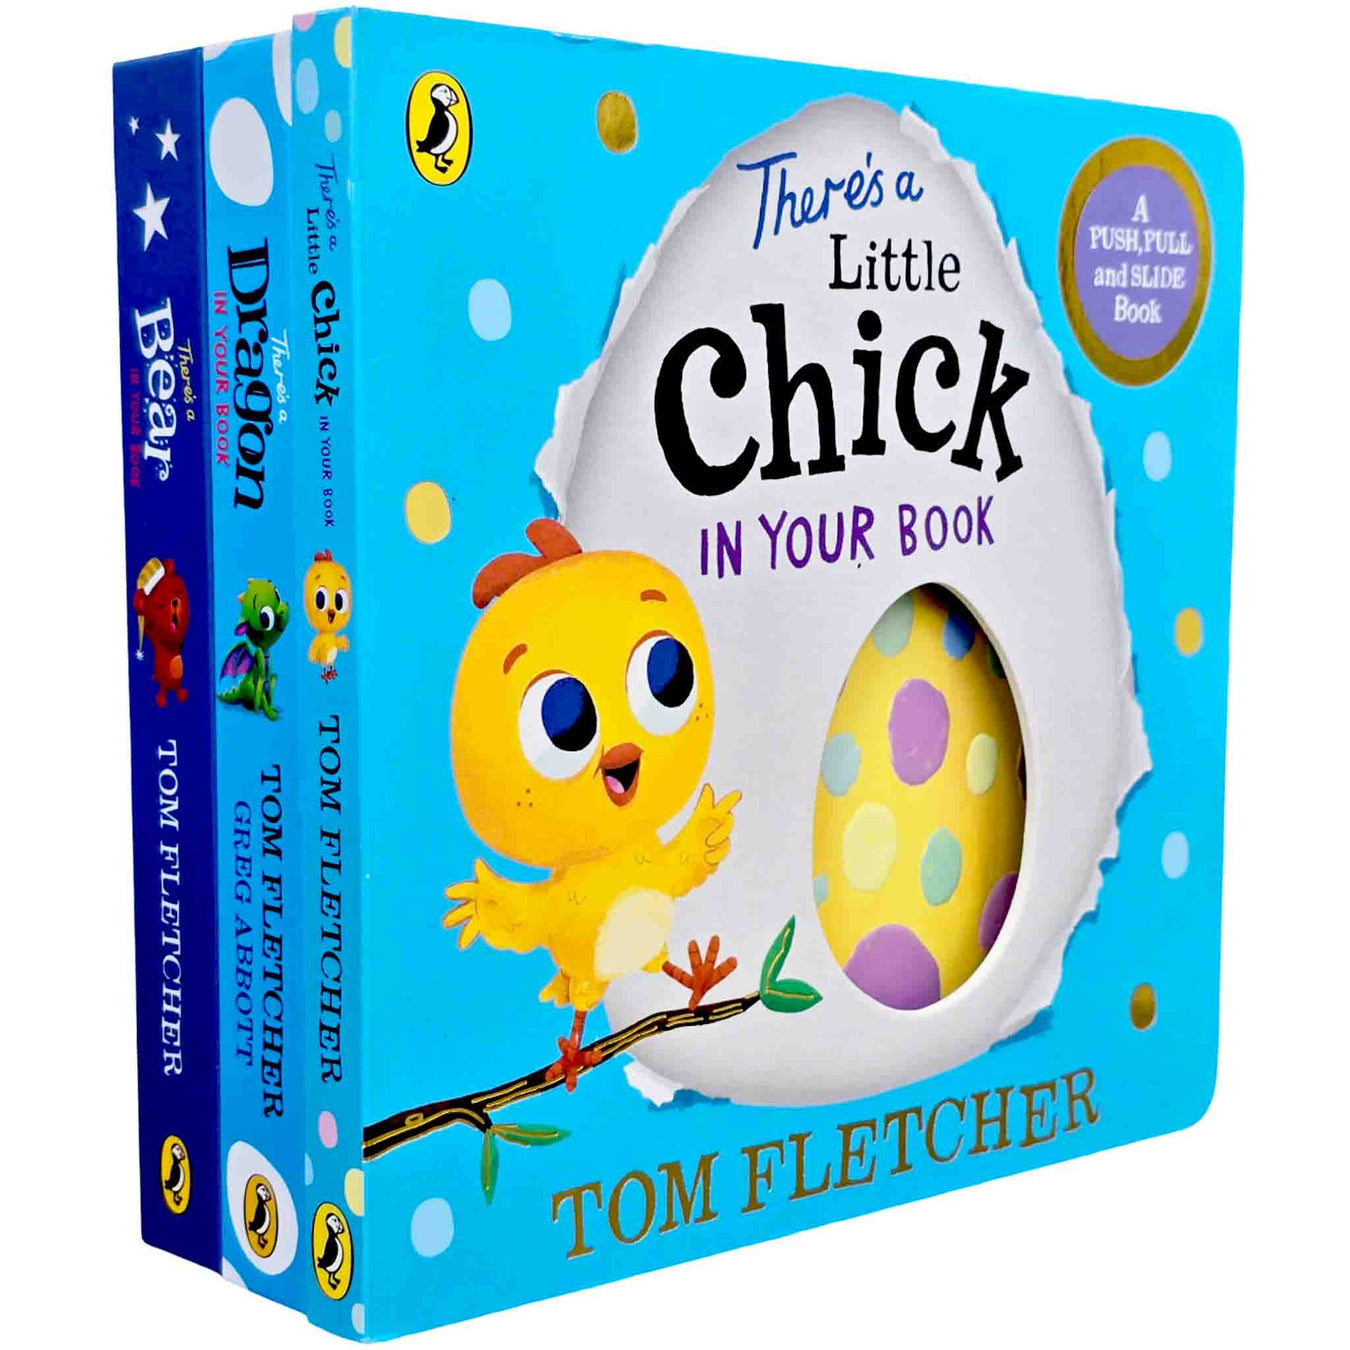 Who's In Your Book? Series By Tom Fletcher 3 Picture Books Collection Set - Ages 2-6 - Board Book 0-5 Penguin